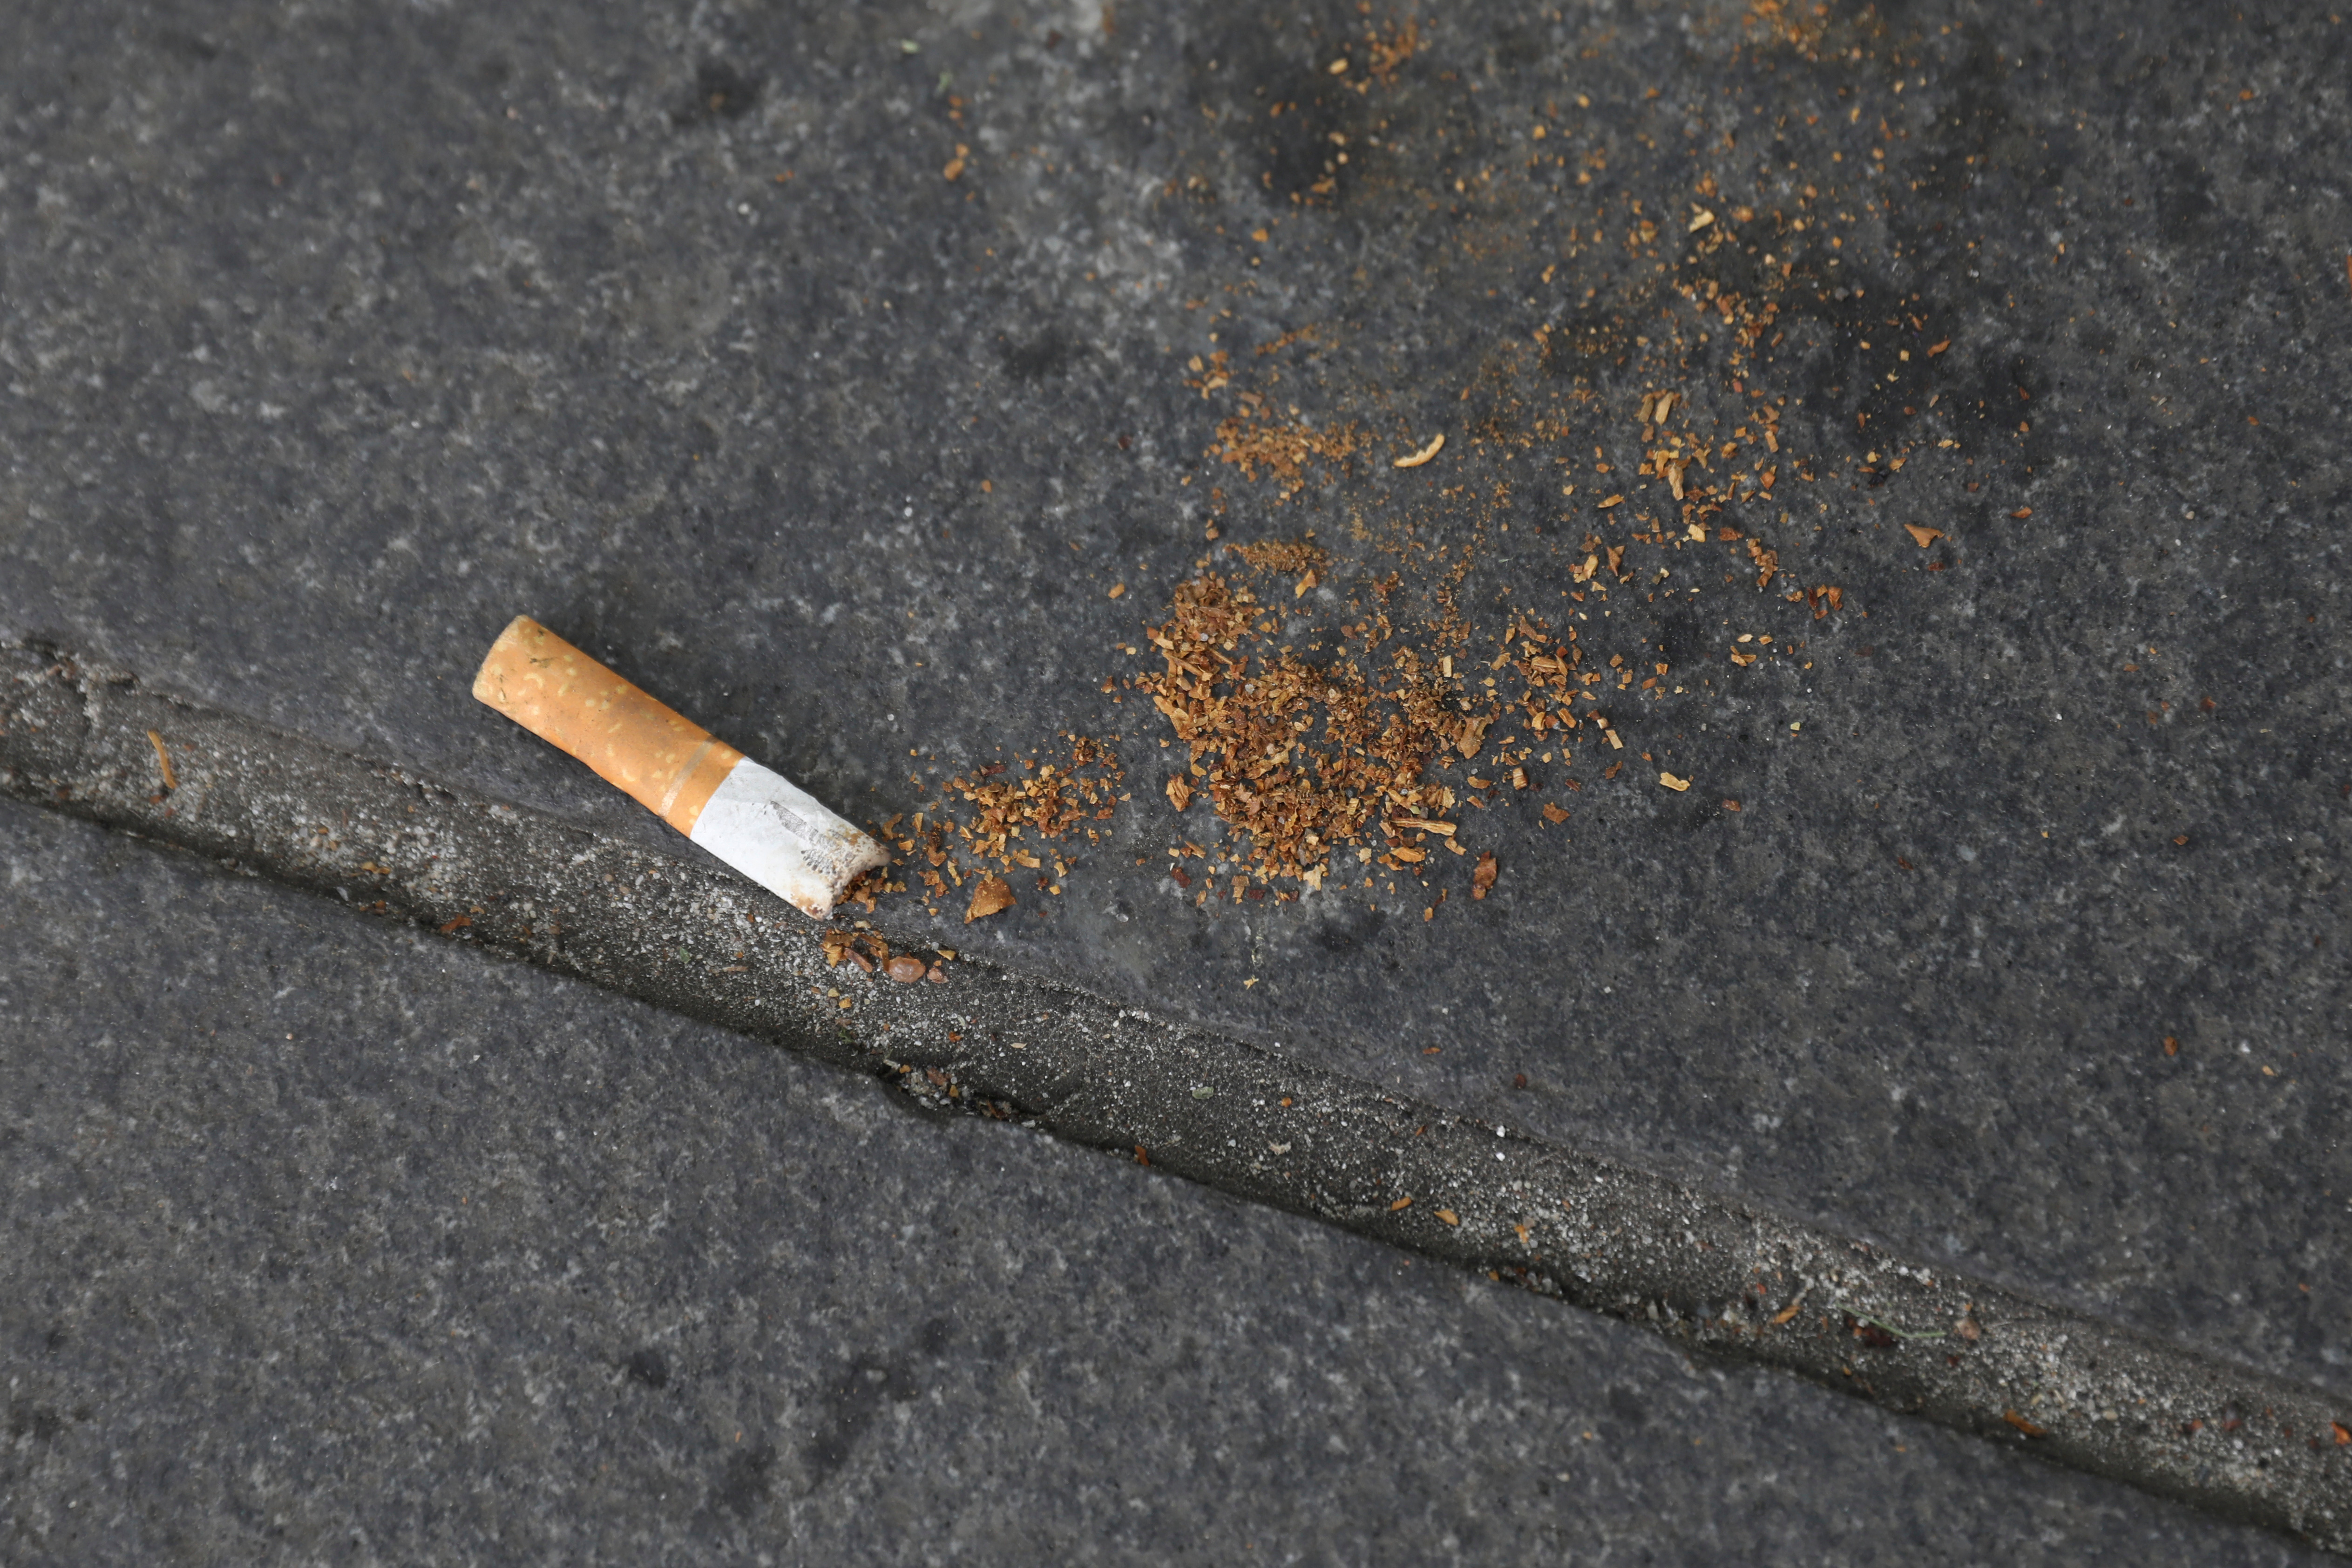 FILE PHOTO - A cigarette butt lies on a street in New York